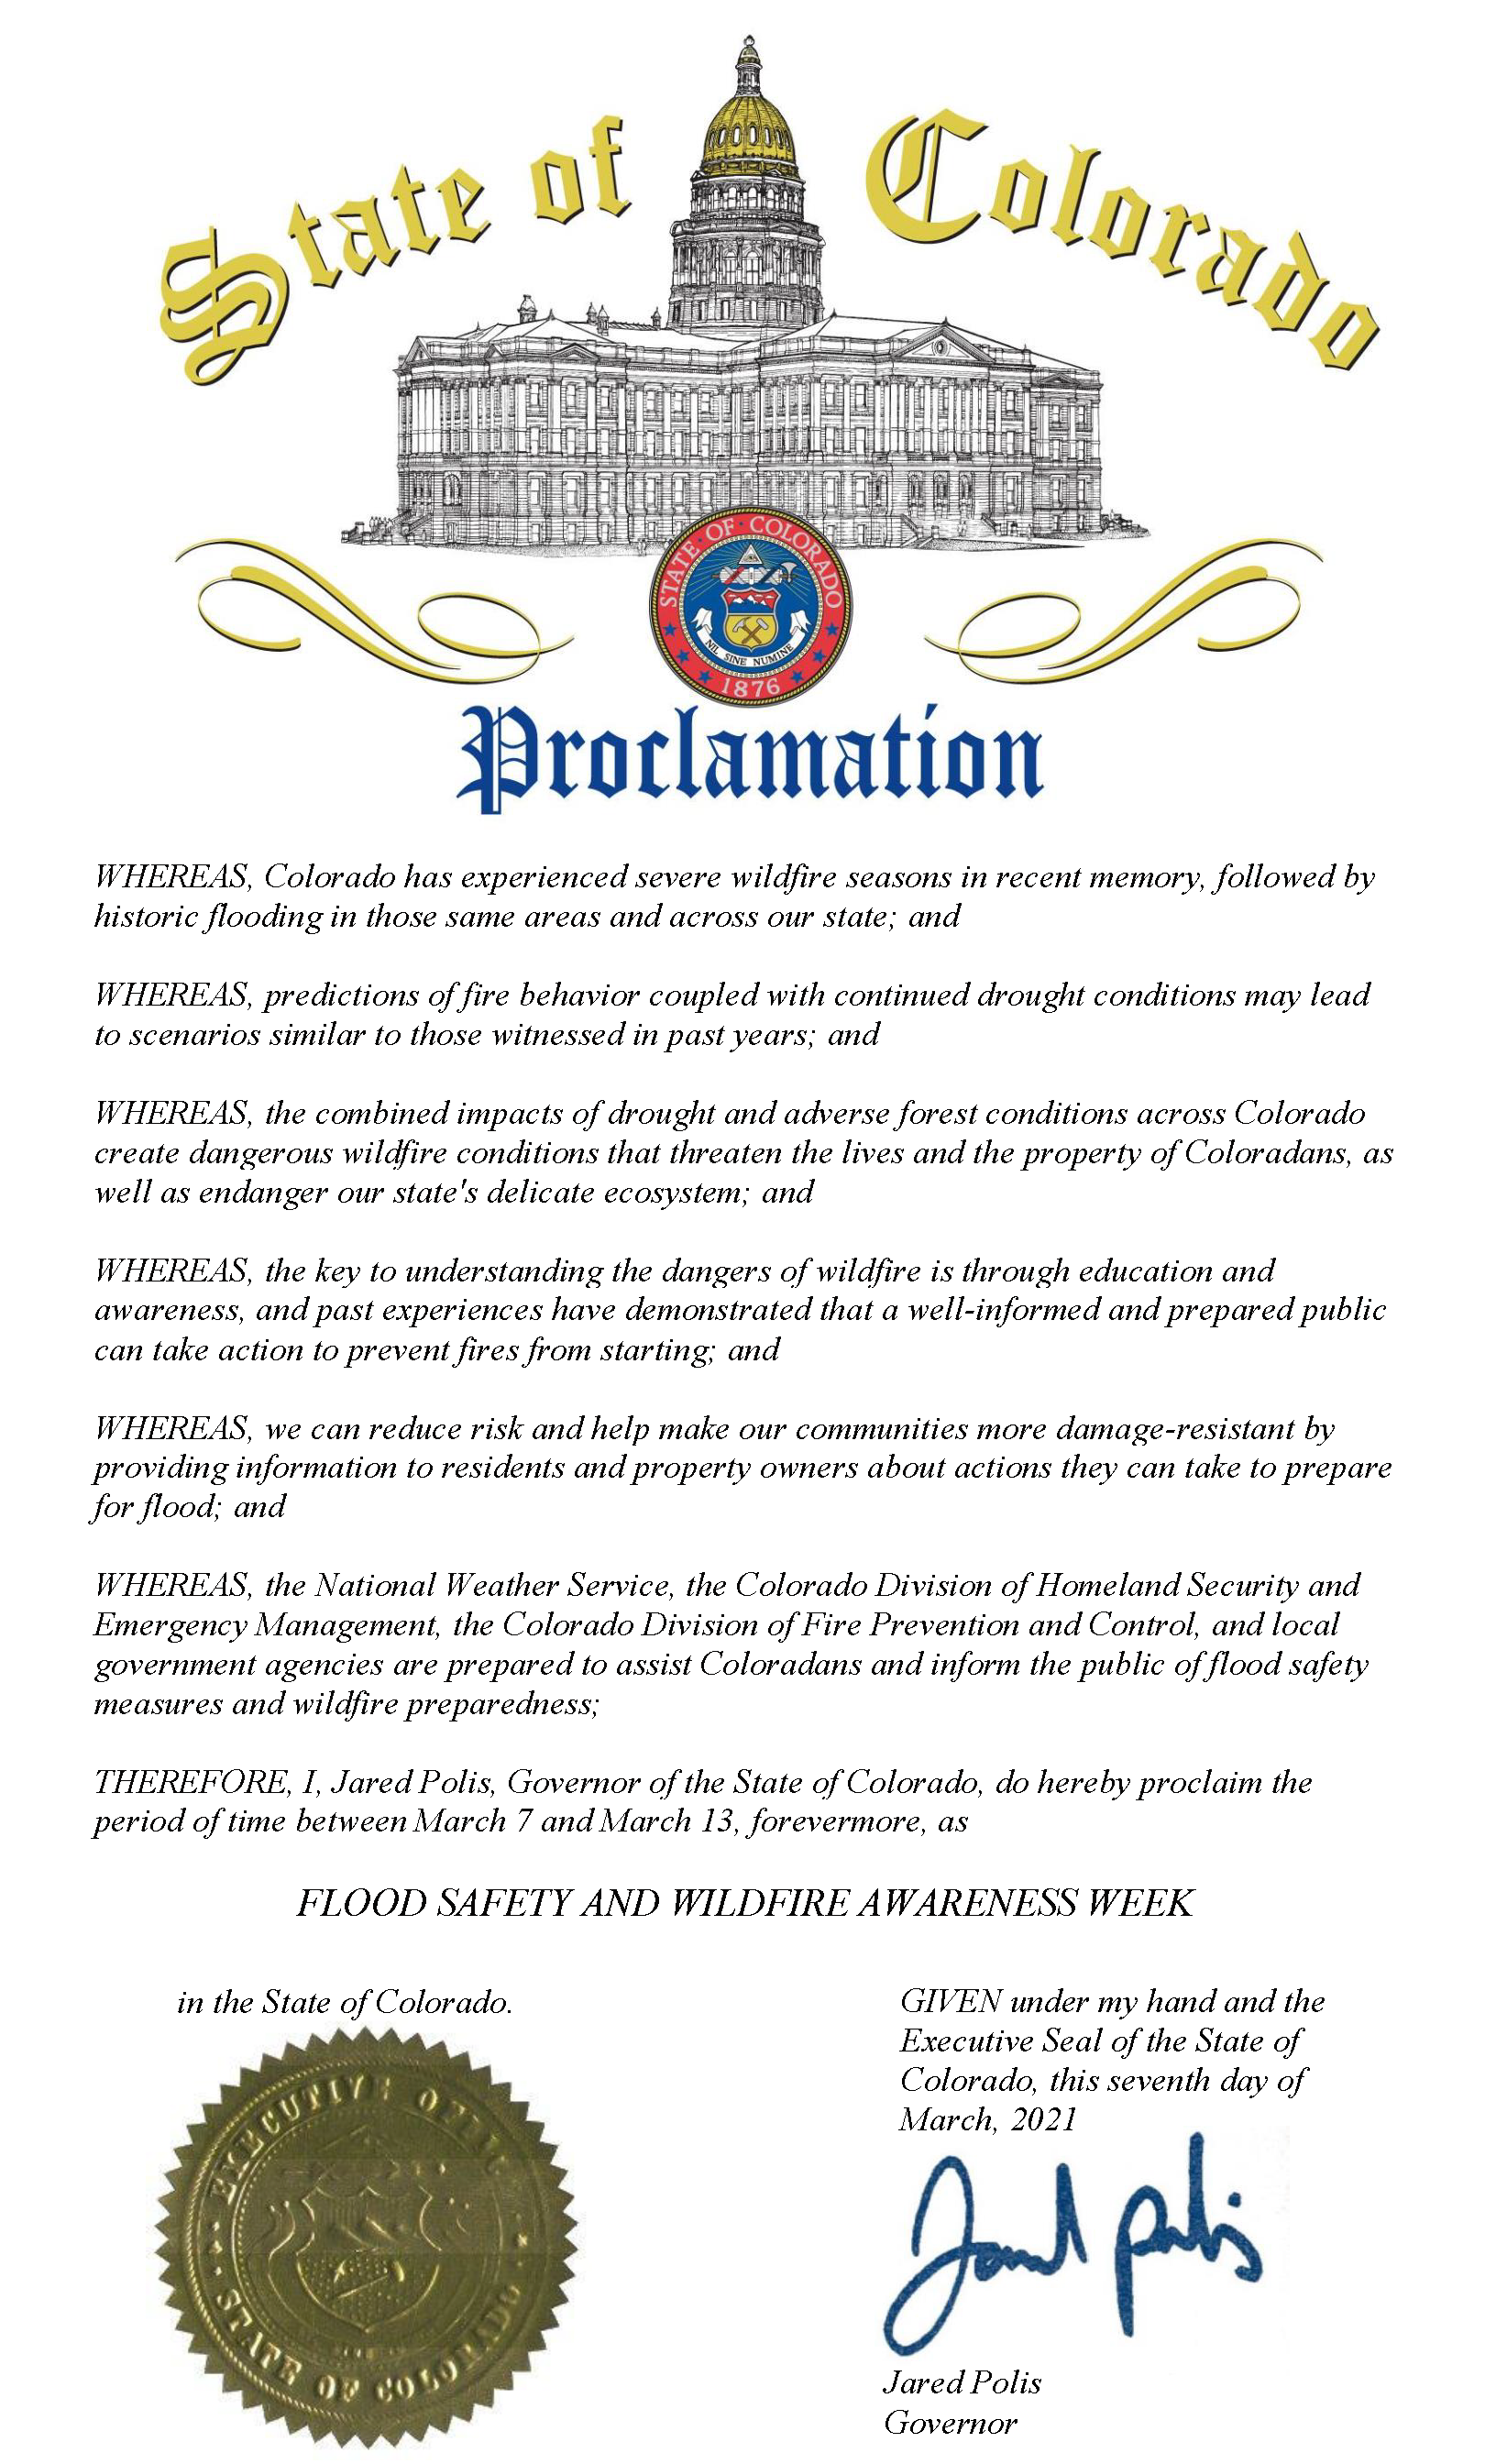 State of Colorado Proclamation document